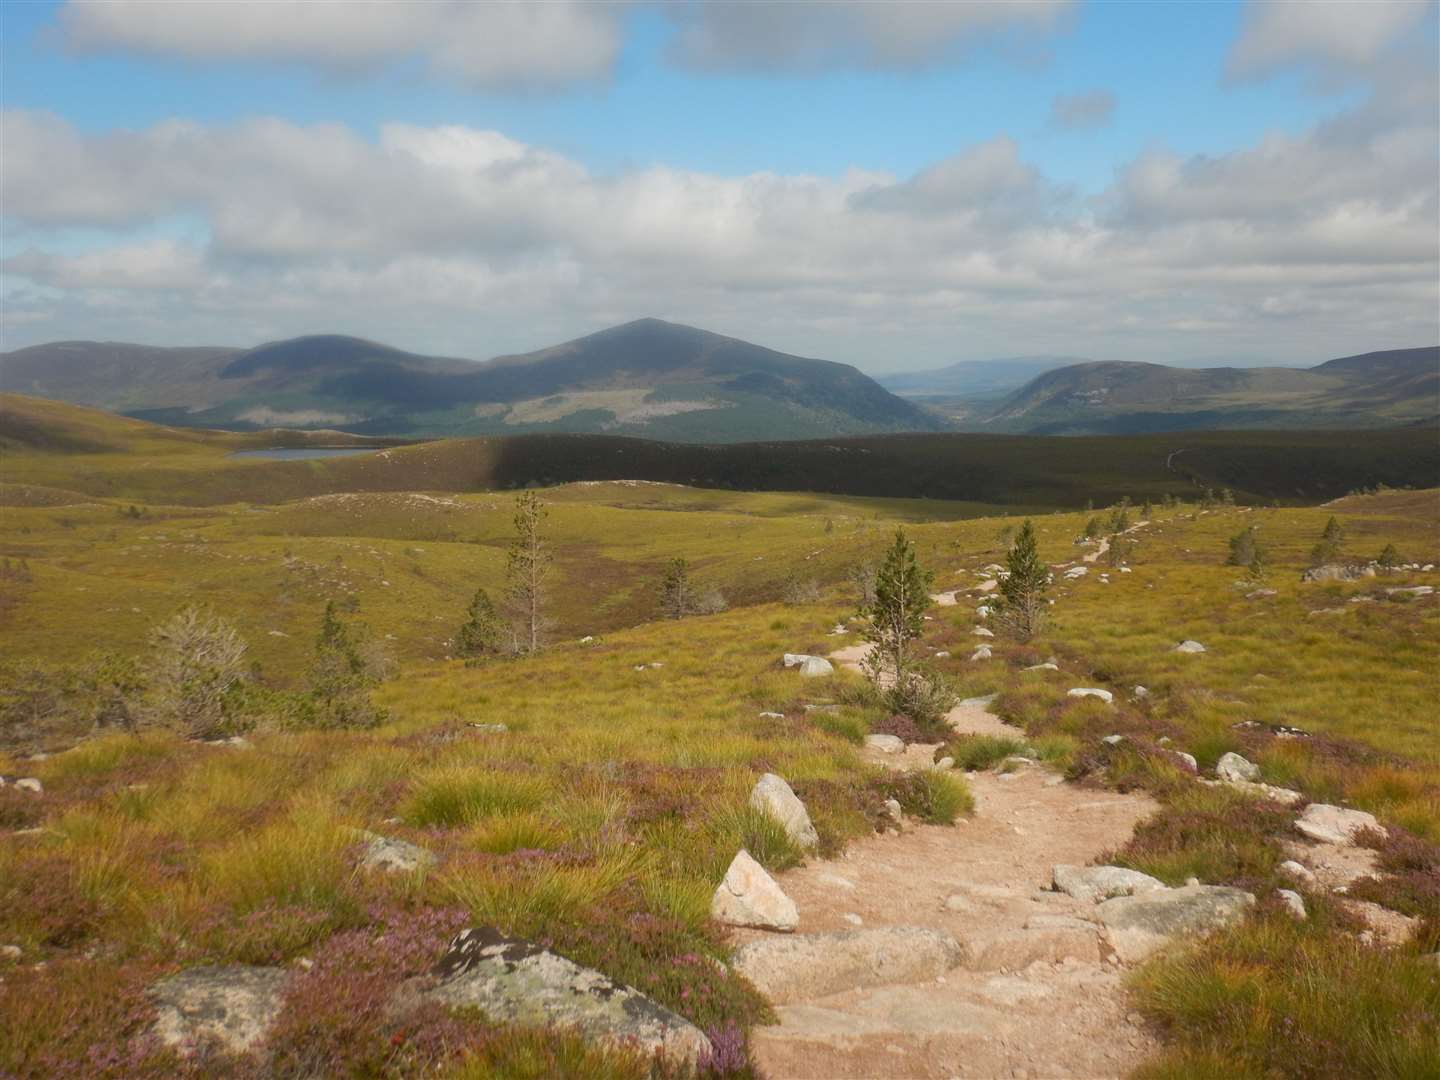 Looking ahead to Meall a' Bhuachaille and the Ryvoan pass as you exit from the Chalamain Gap.